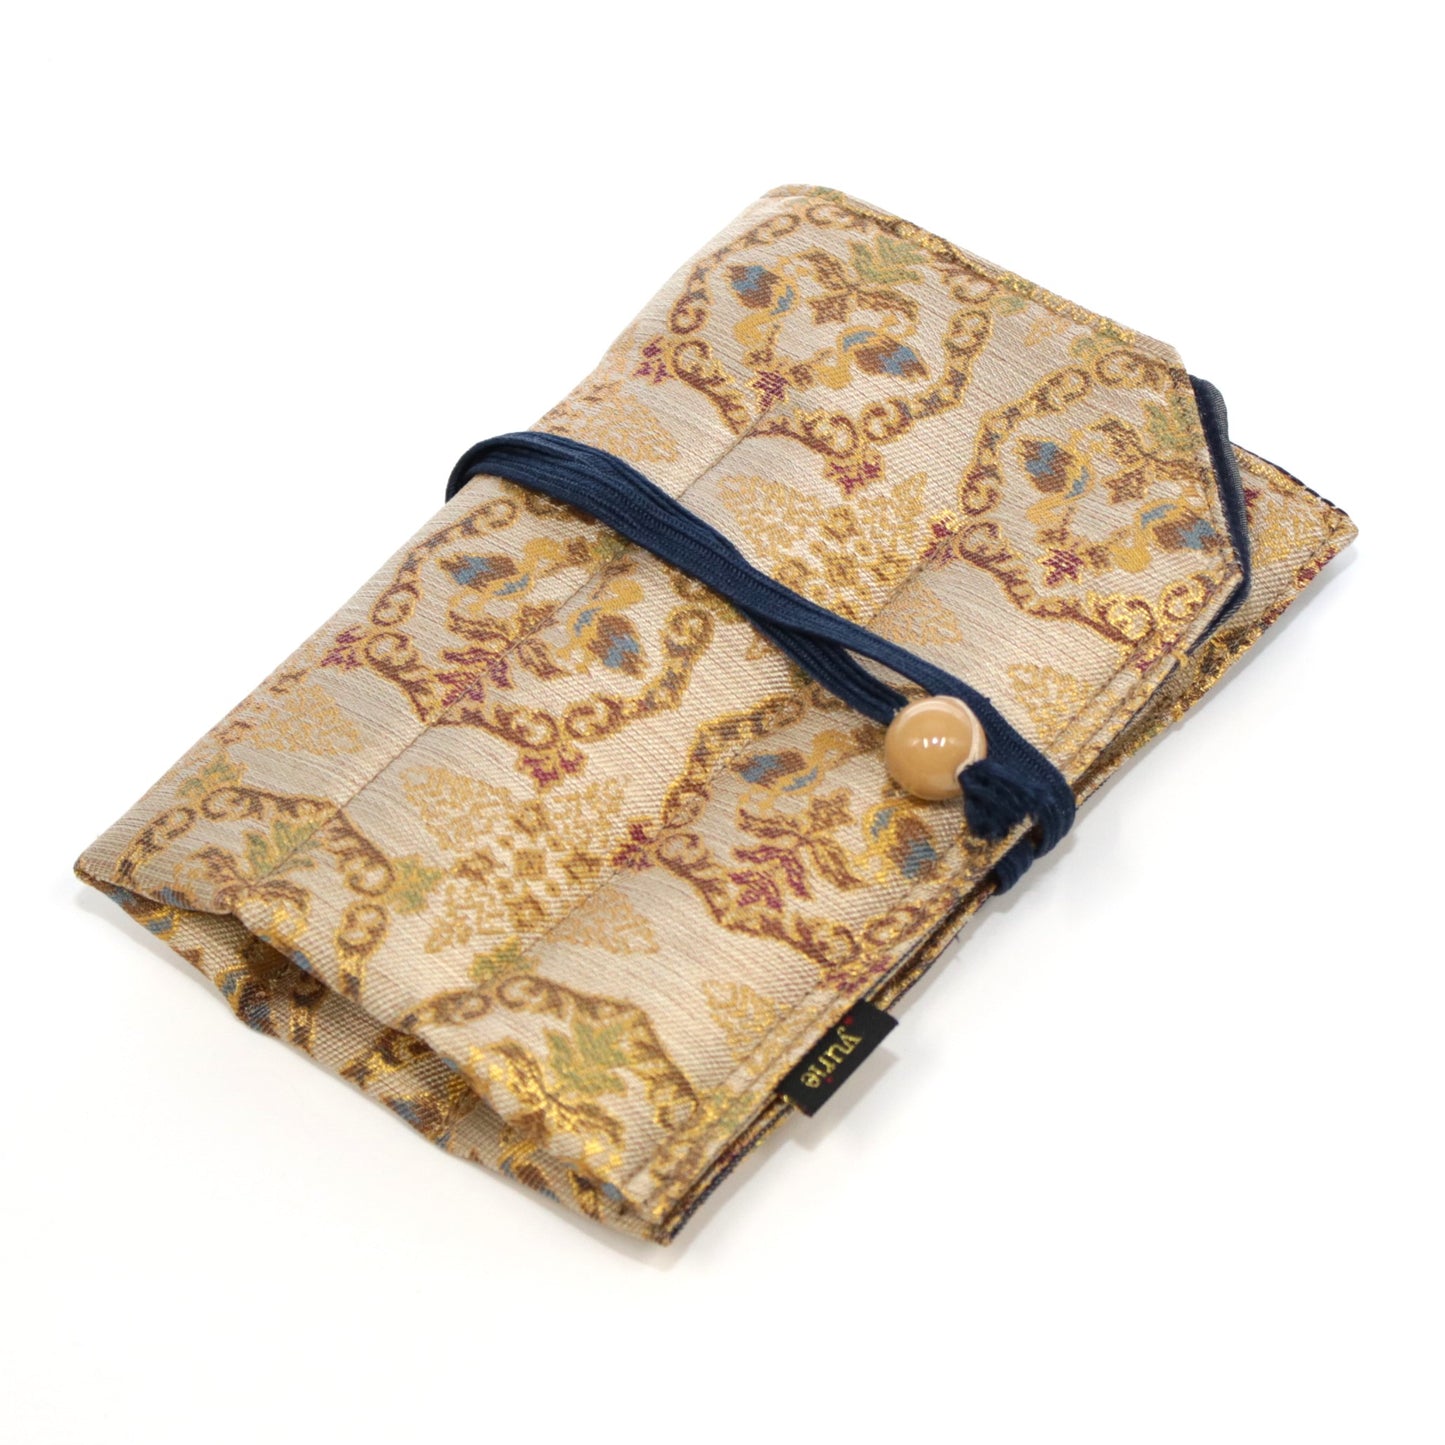 Pure silk pen roll for 6 pens "Mukaidori (gold)" by yurie